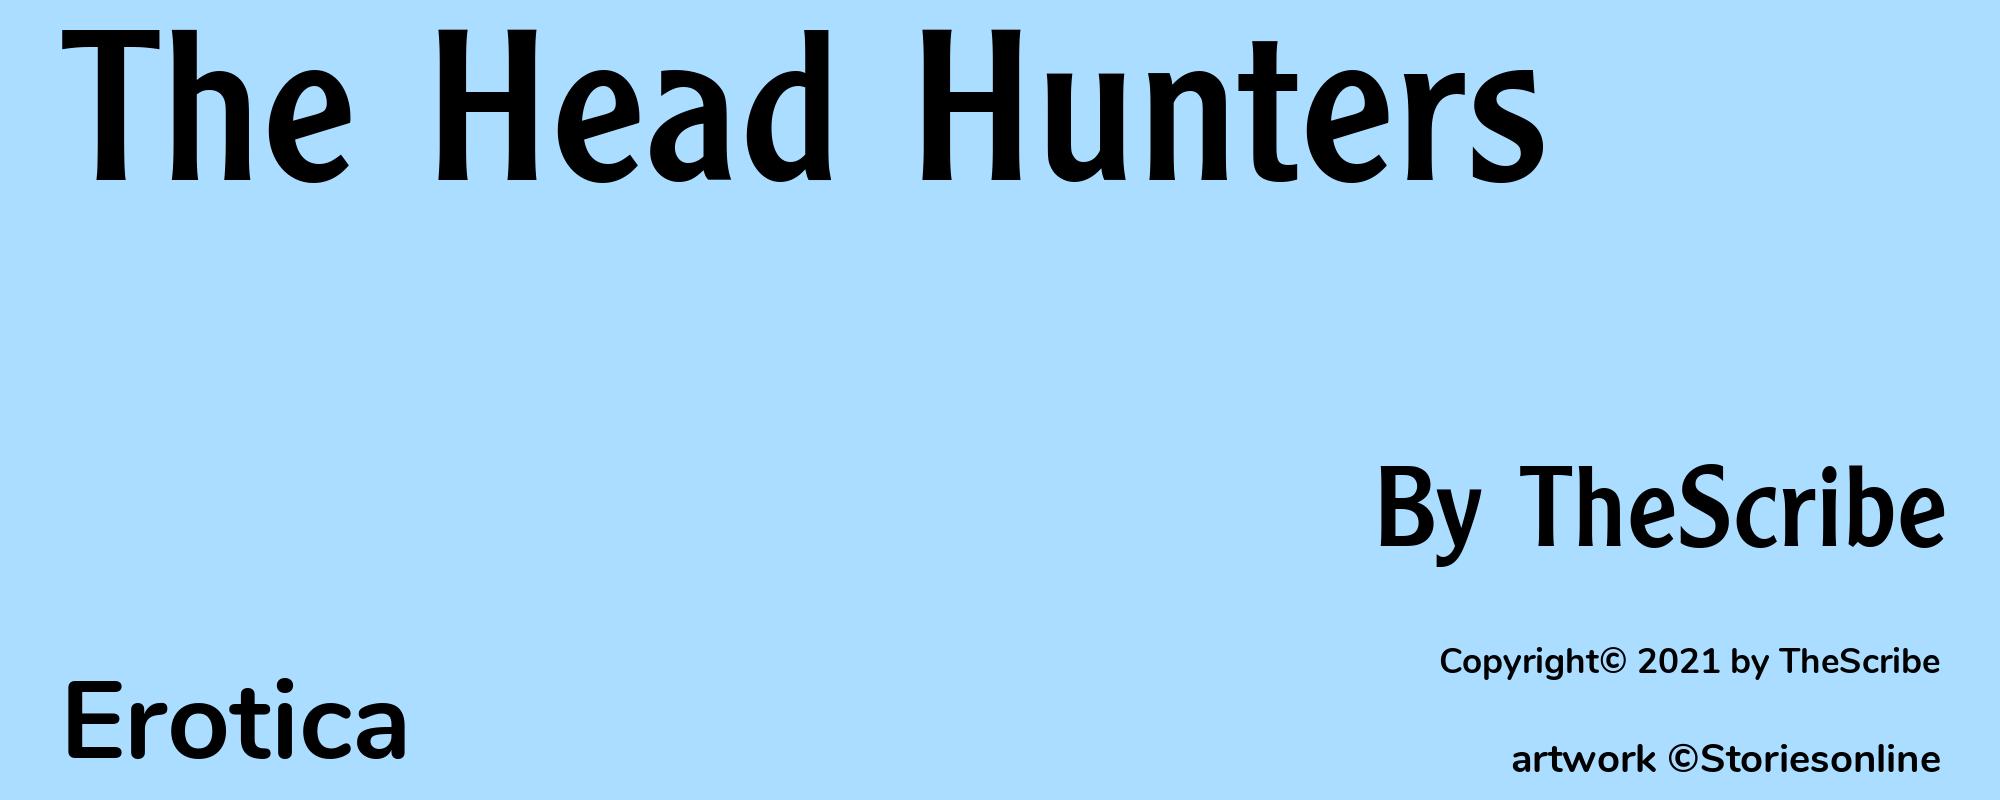 The Head Hunters - Cover